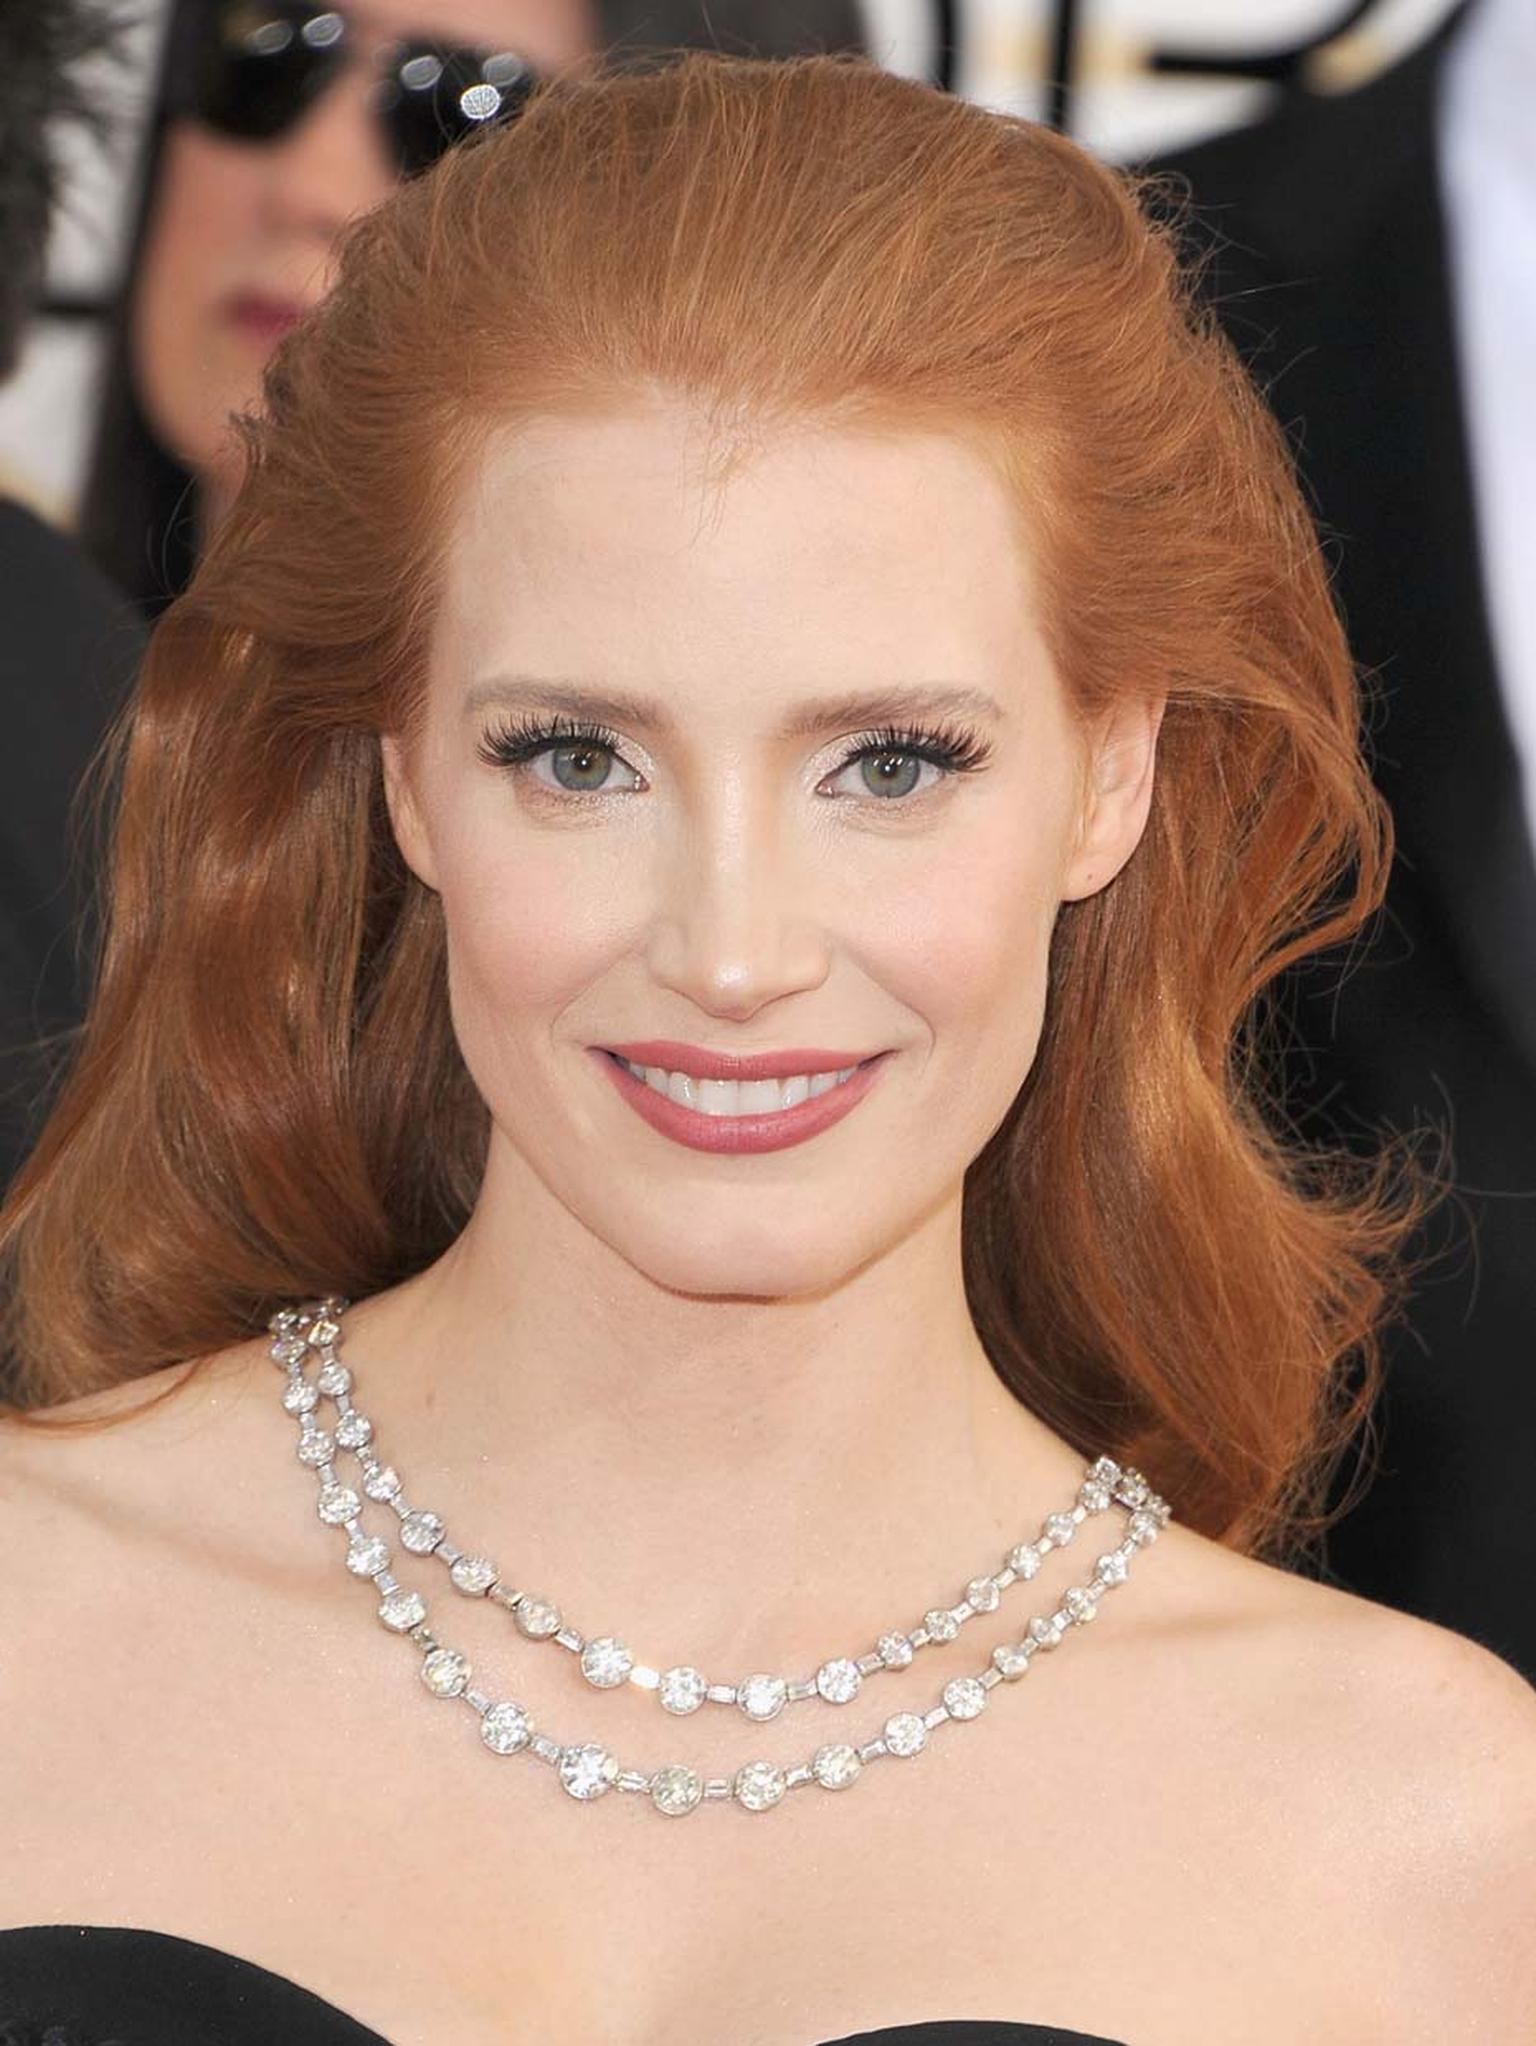 Red carpet favourite Jessica Chastain wore a platinum and diamond necklace, circa 1930, from Bulgari’s Heritage Collection to the Golden Globes 2014